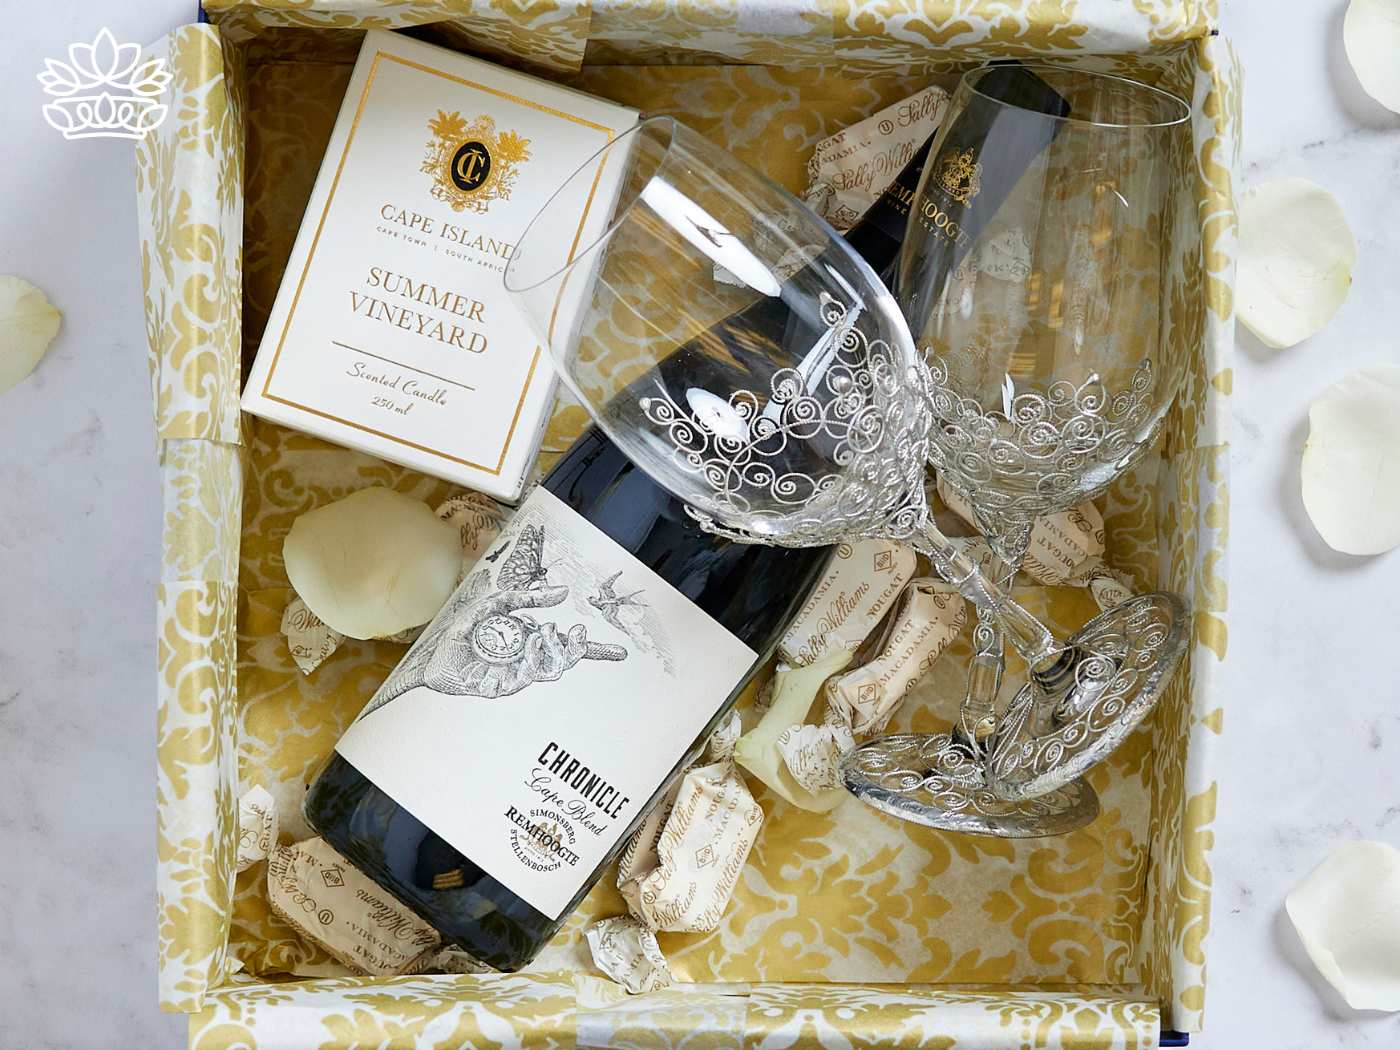 Elegant graduation gift set from Fabulous Flowers and Gifts, featuring a bottle of Chronicle red wine, two decorative wine glasses, and a Summer Vineyard scented candle, all presented in a gold-patterned box with rose petals.